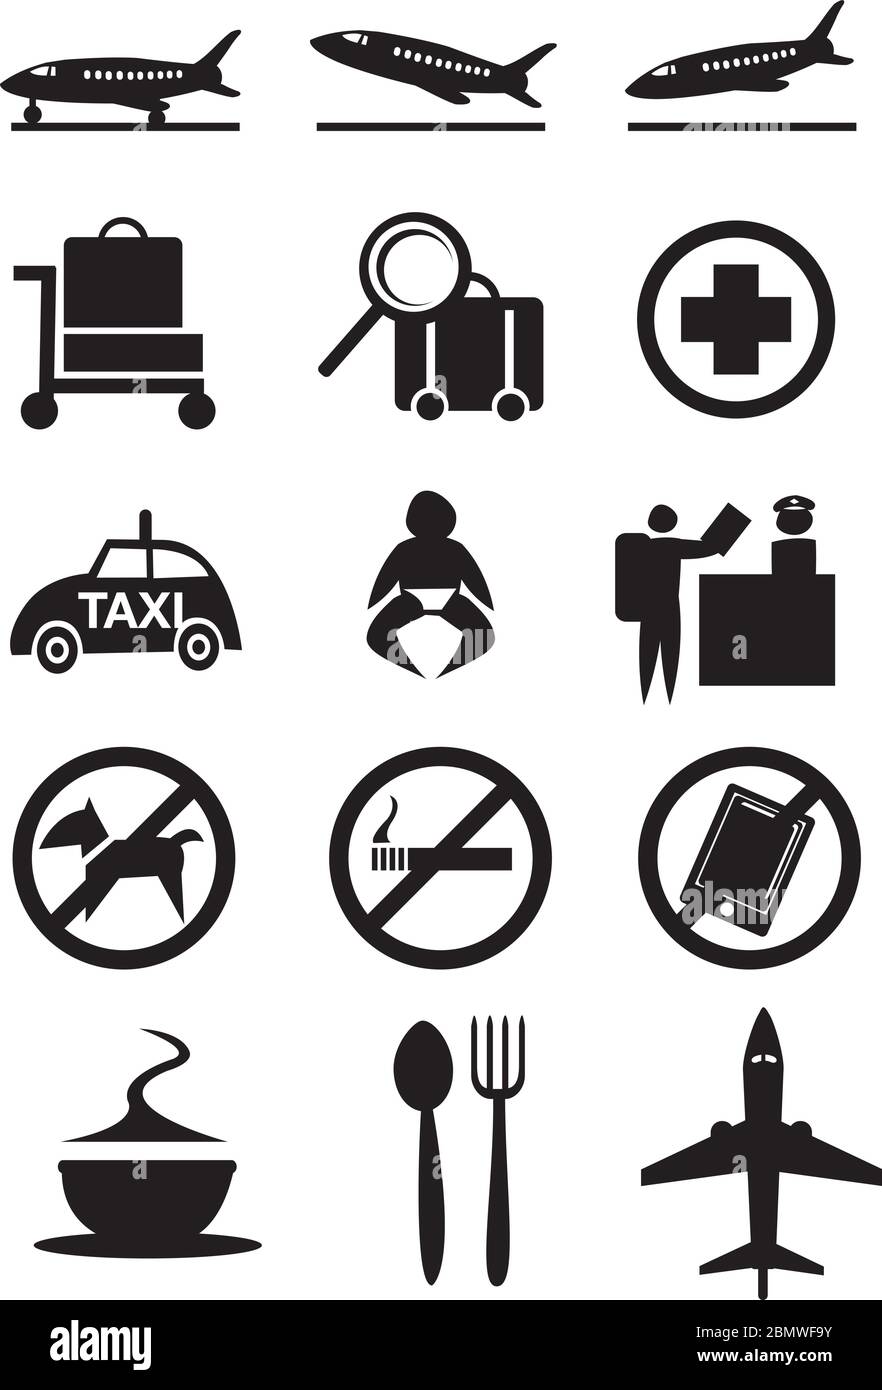 Vector illustration of some icons and signs commonly found in airport. Stock Vector